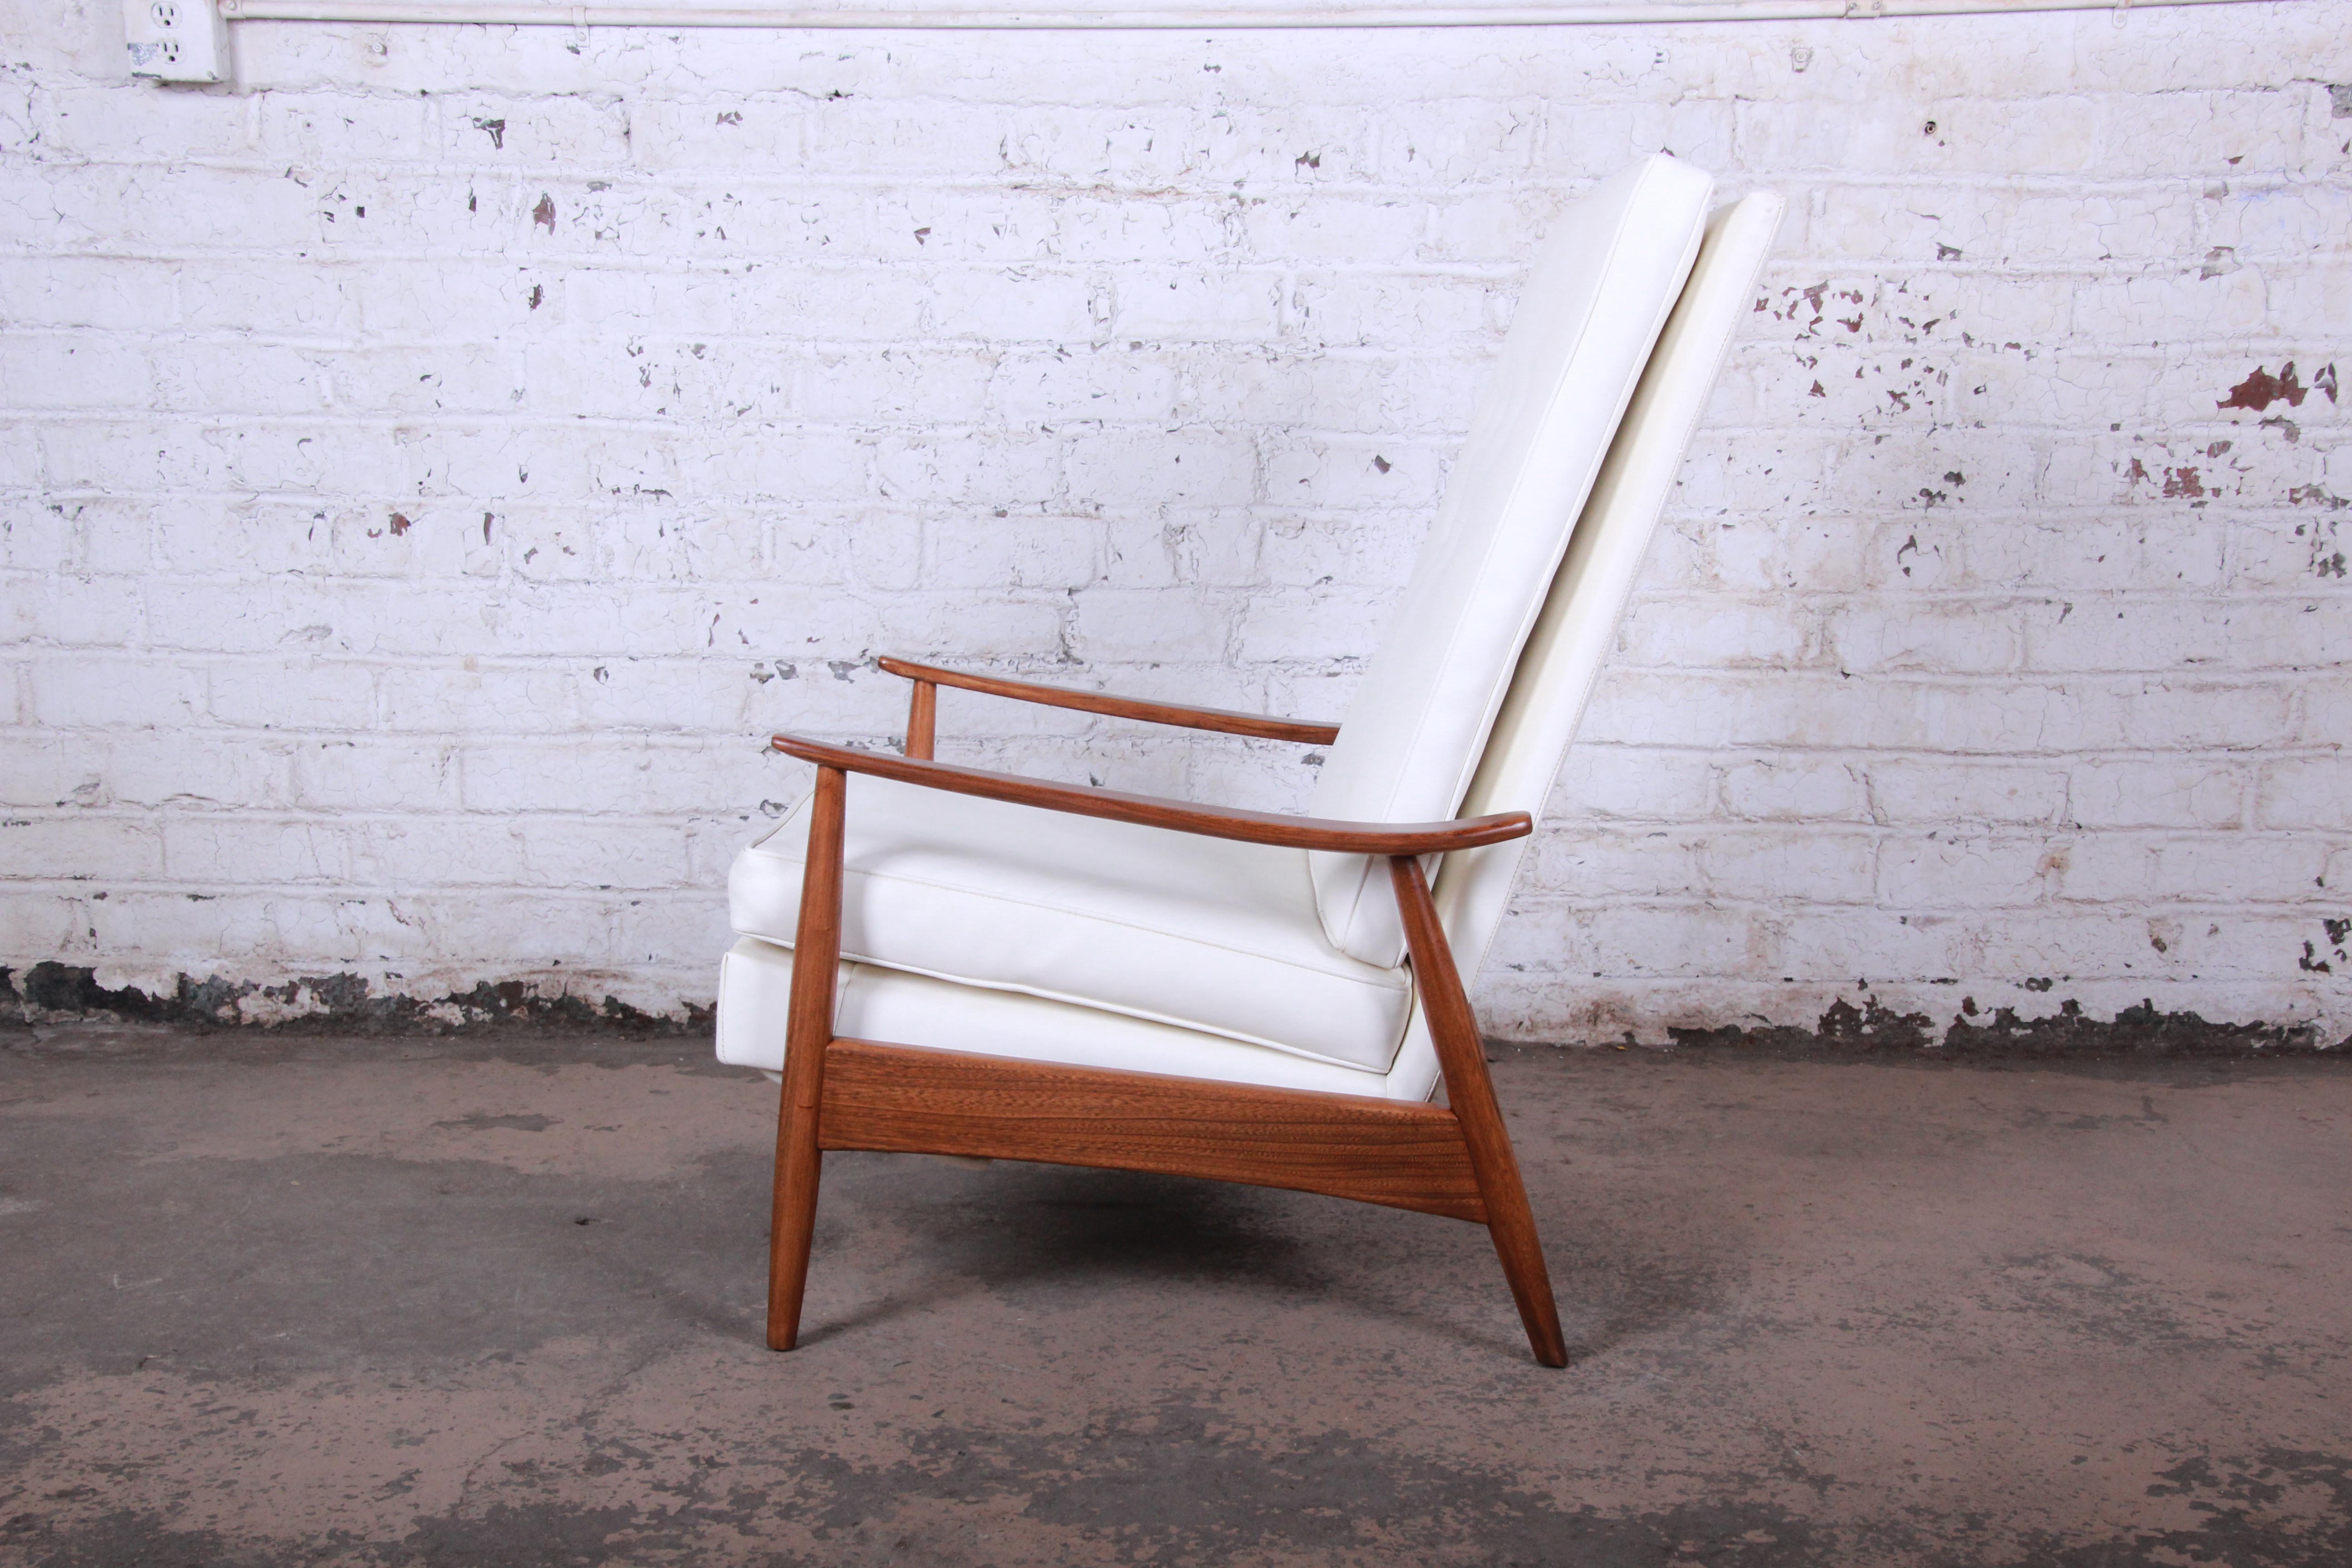 An exceptional Mid-Century Modern reclining lounge chair designed by Milo Baughman for James Inc. The chair features a gorgeous sculptural walnut frame and original white vinyl upholstery in excellent condition. The frame has been professionally